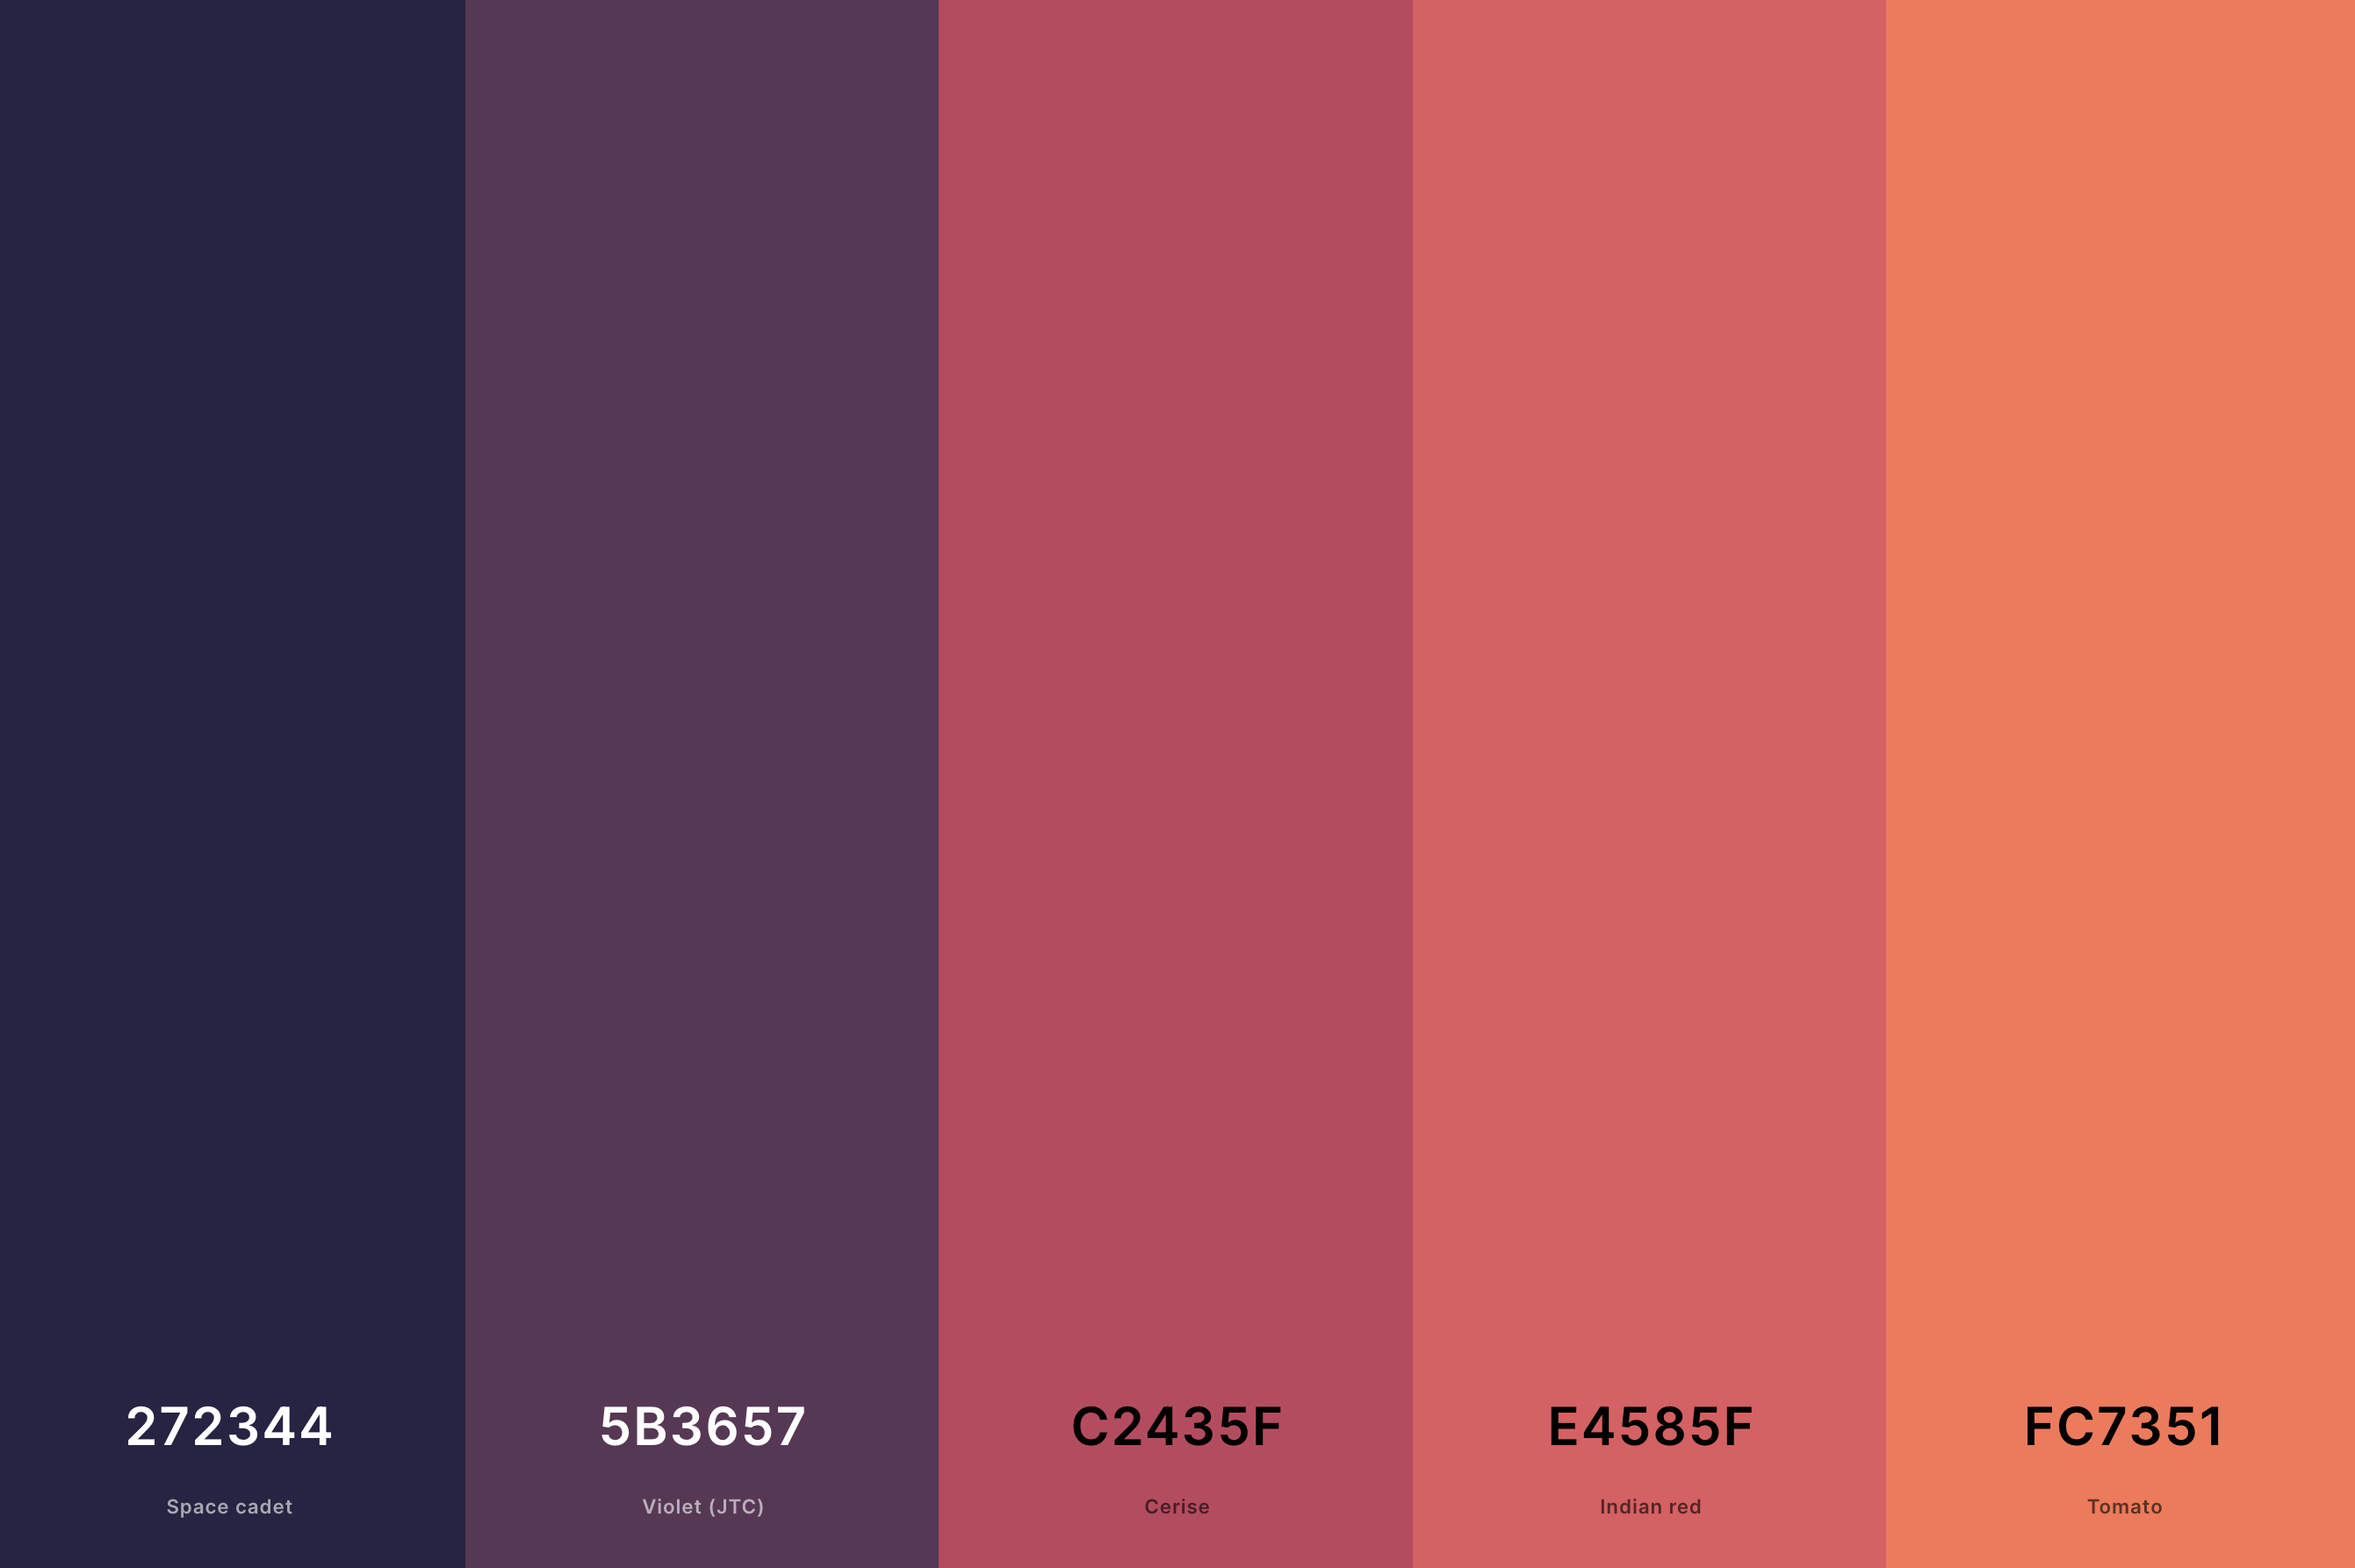 13. Mountain Sunset Color Palette Color Palette with Space Cadet (Hex #272344) + Violet (Jtc) (Hex #5B3657) + Cerise (Hex #C2435F) + Indian Red (Hex #E4585F) + Tomato (Hex #FC7351) Color Palette with Hex Codes